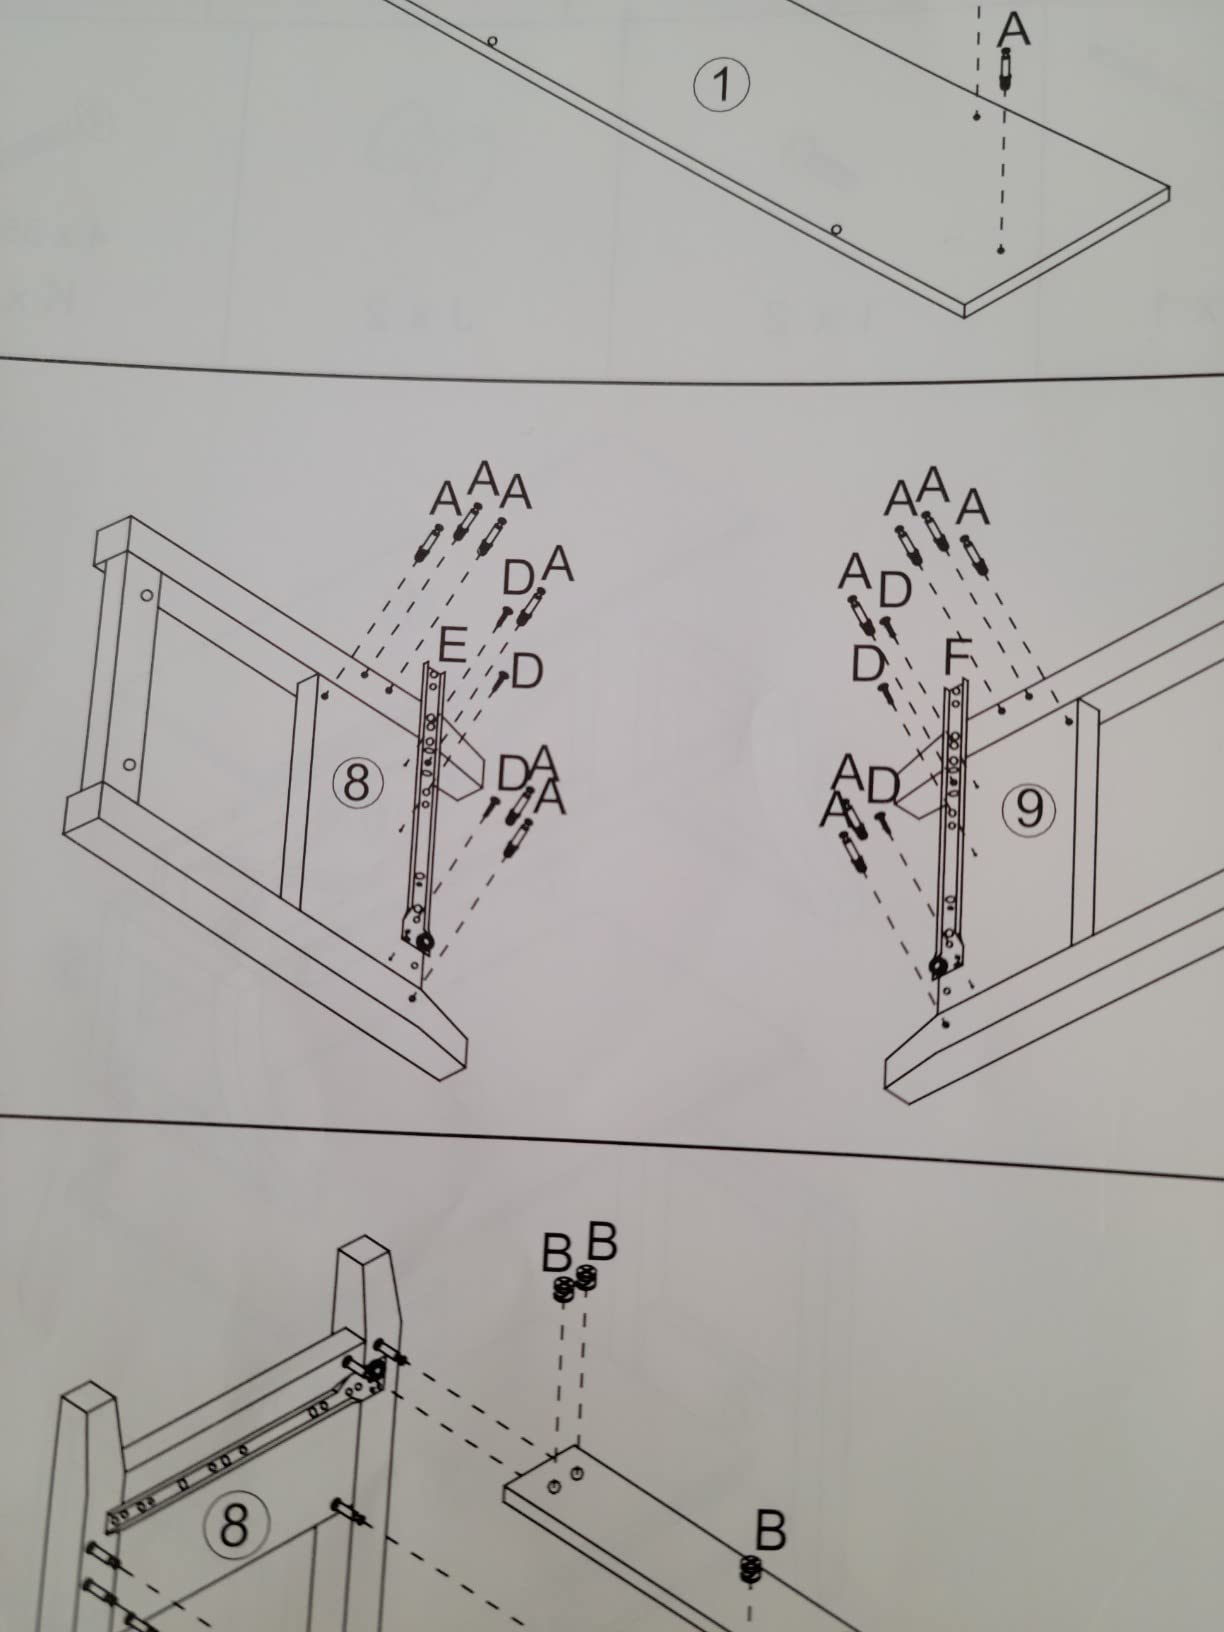 Assembly instructions aren't the best